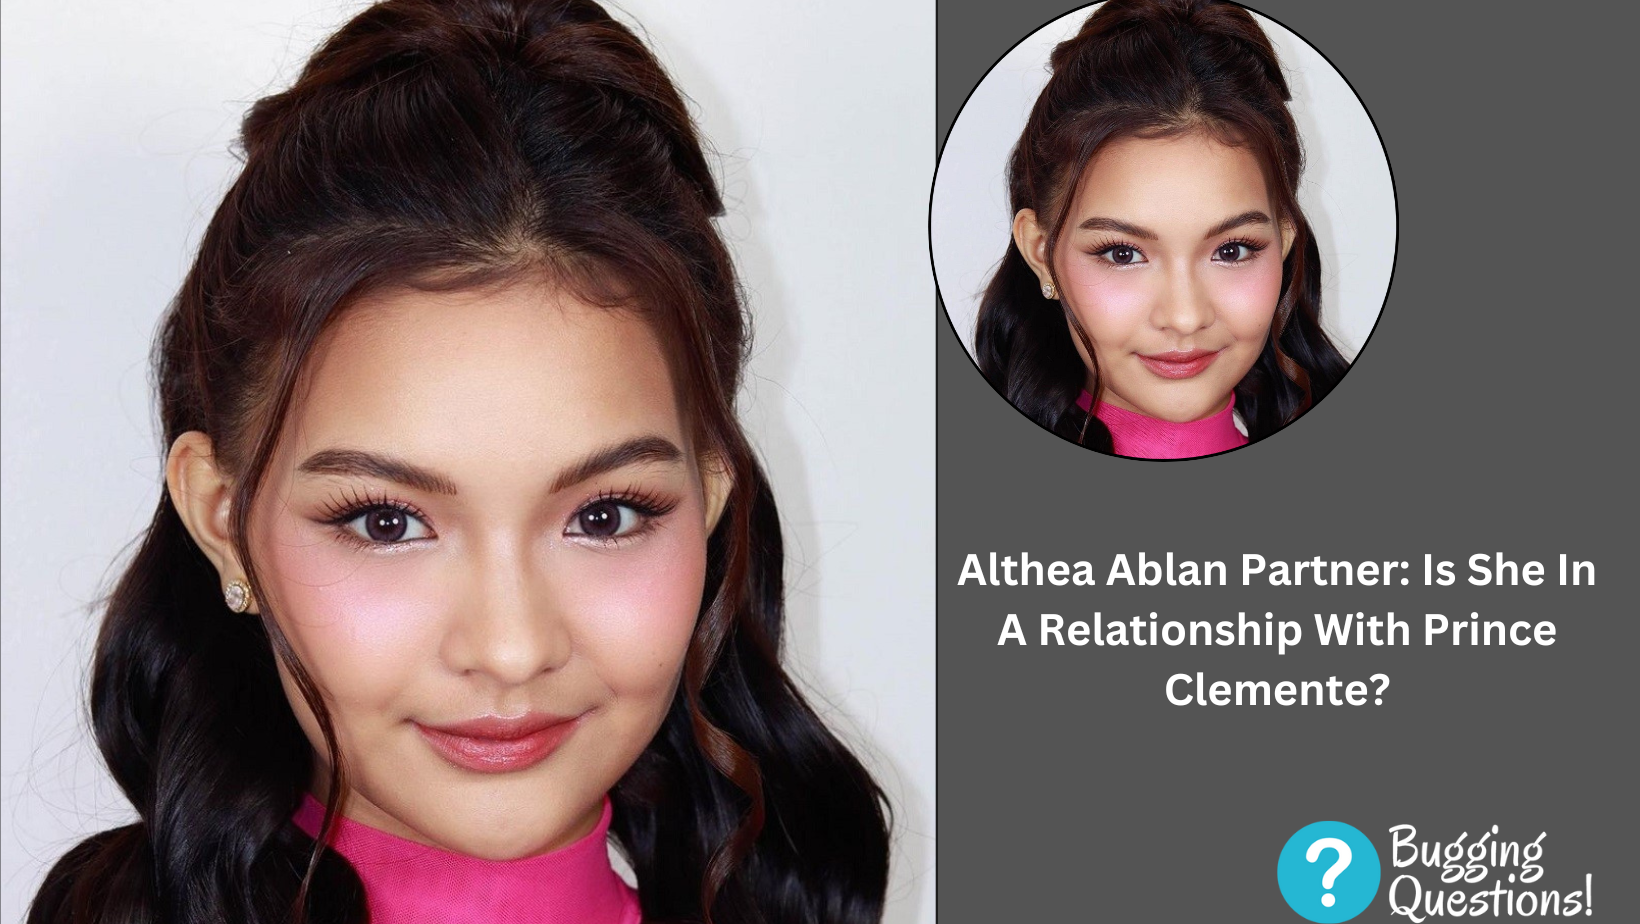 Althea Ablan Partner: Is She In A Relationship With Prince Clemente?